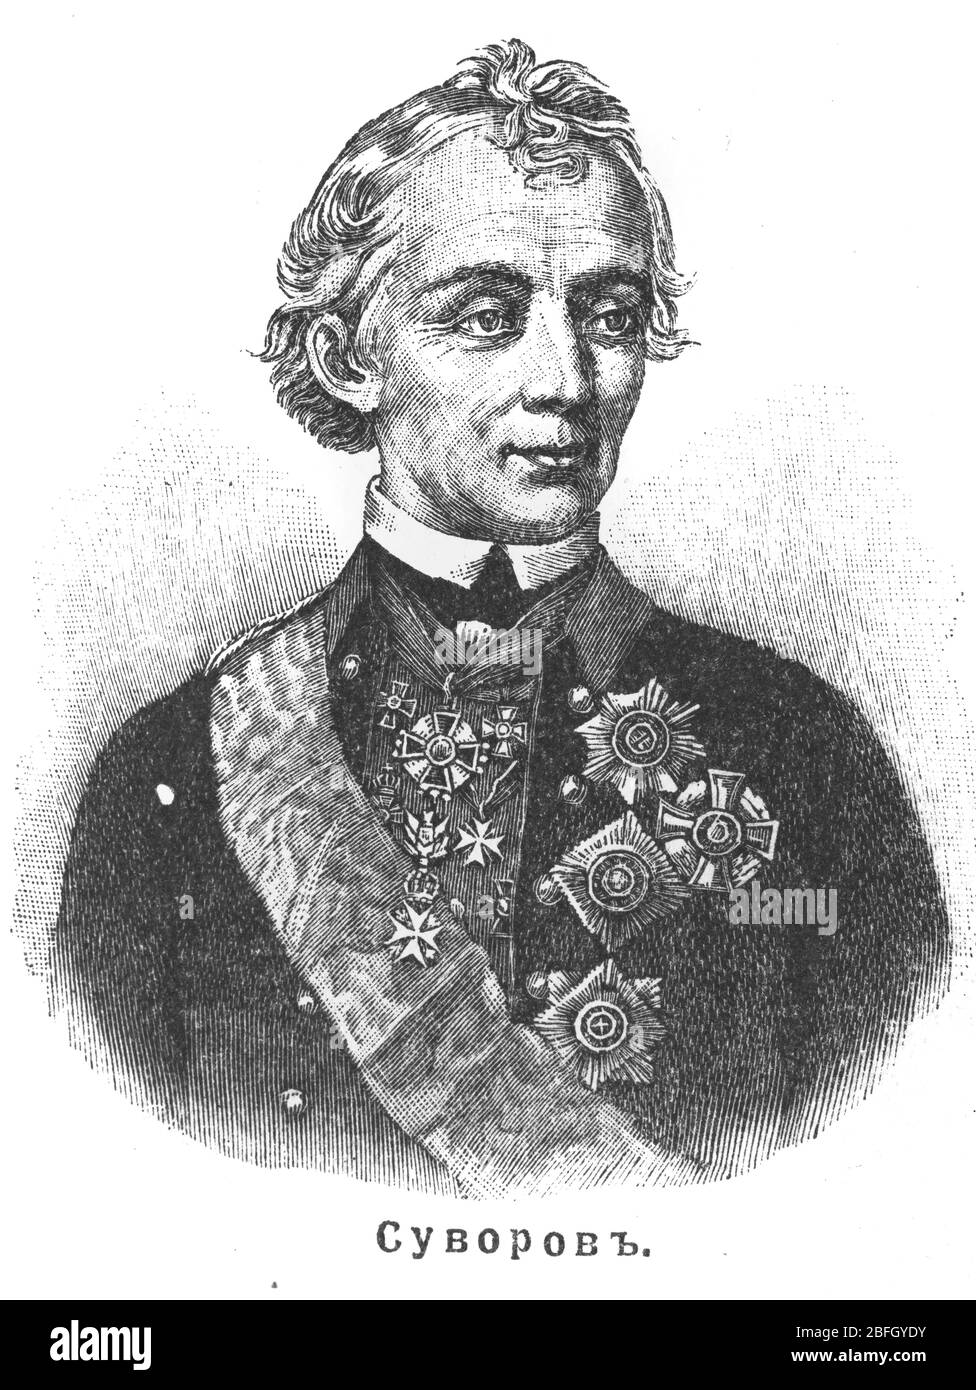 Alexander Suvorov, Russian 18th century army general, illustration from book dated 1916 Stock Photo